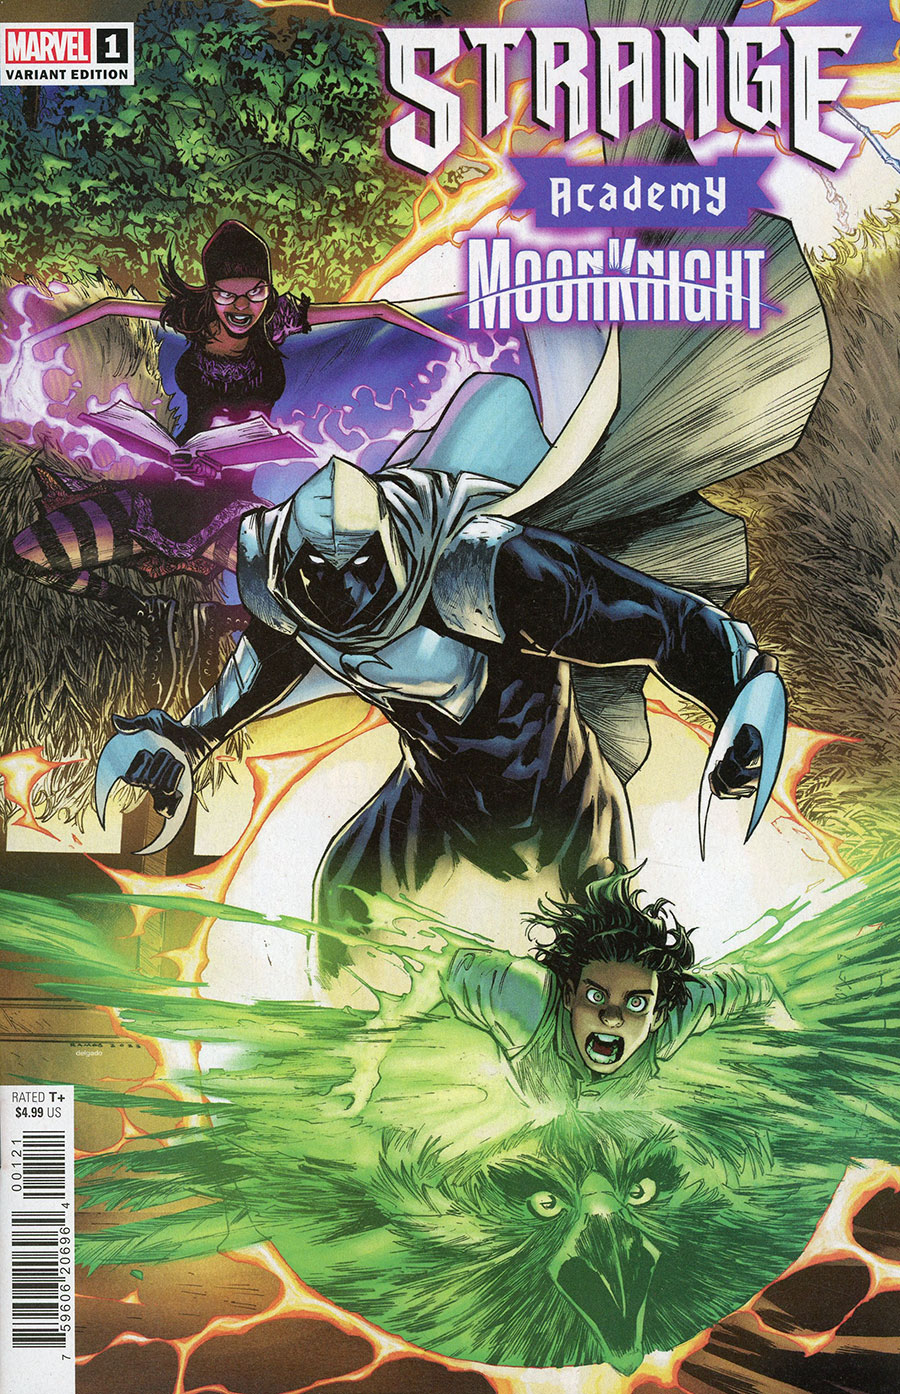 Strange Academy Moon Knight #1 (One Shot) Cover B Variant Humberto Ramos Connecting Cover